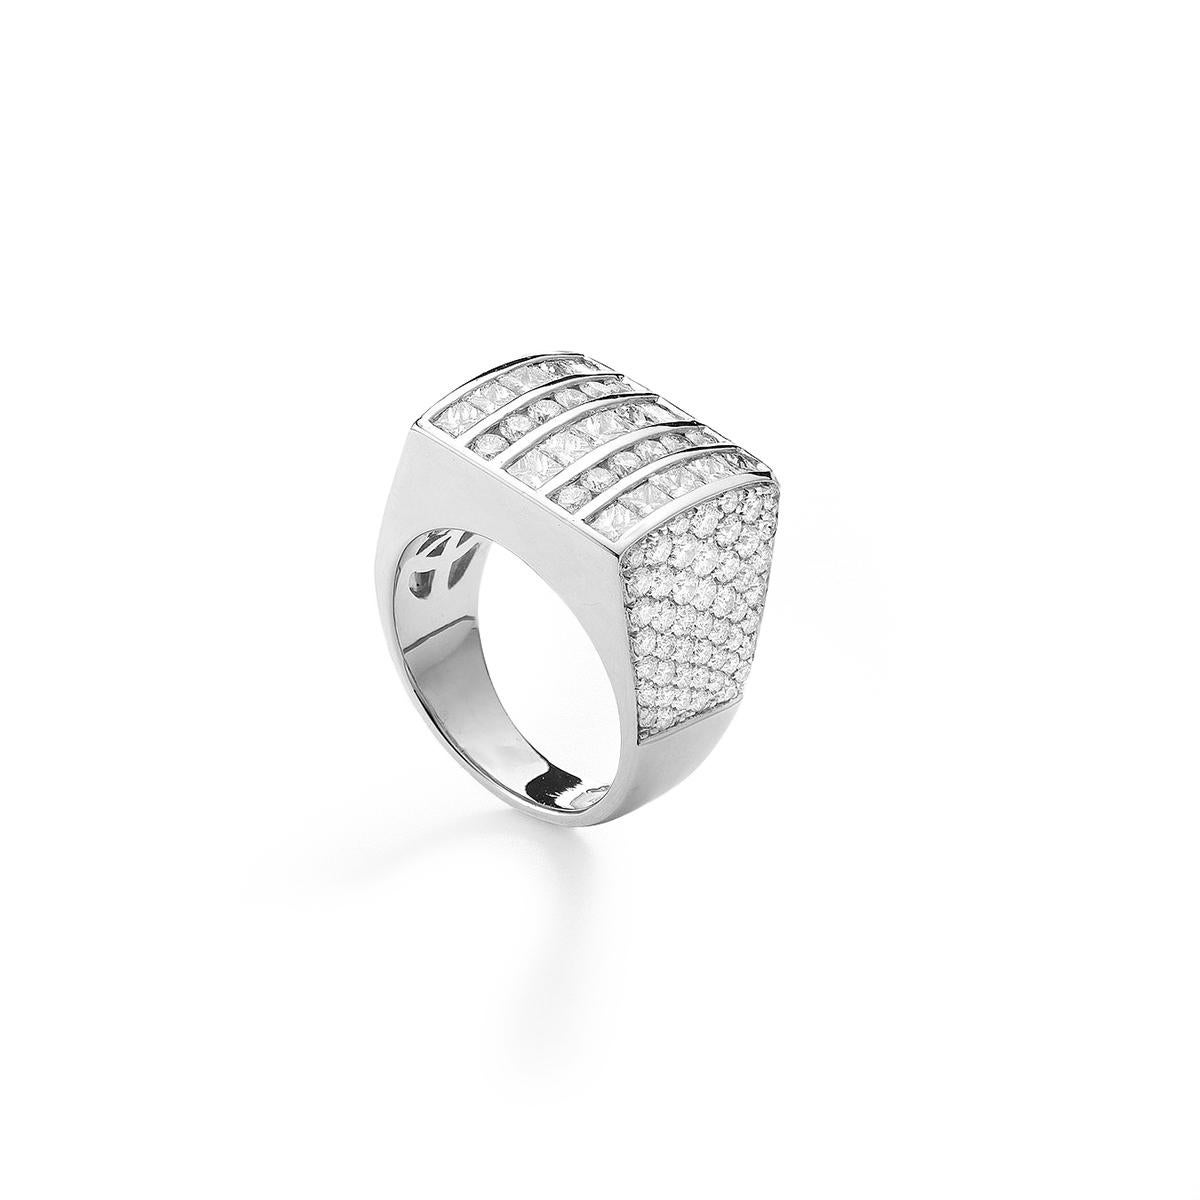 Men's ring in 18kt white gold set with 110 diamonds 2.42 cts and 10 princess cut diamonds 1.66 cts Size 59      